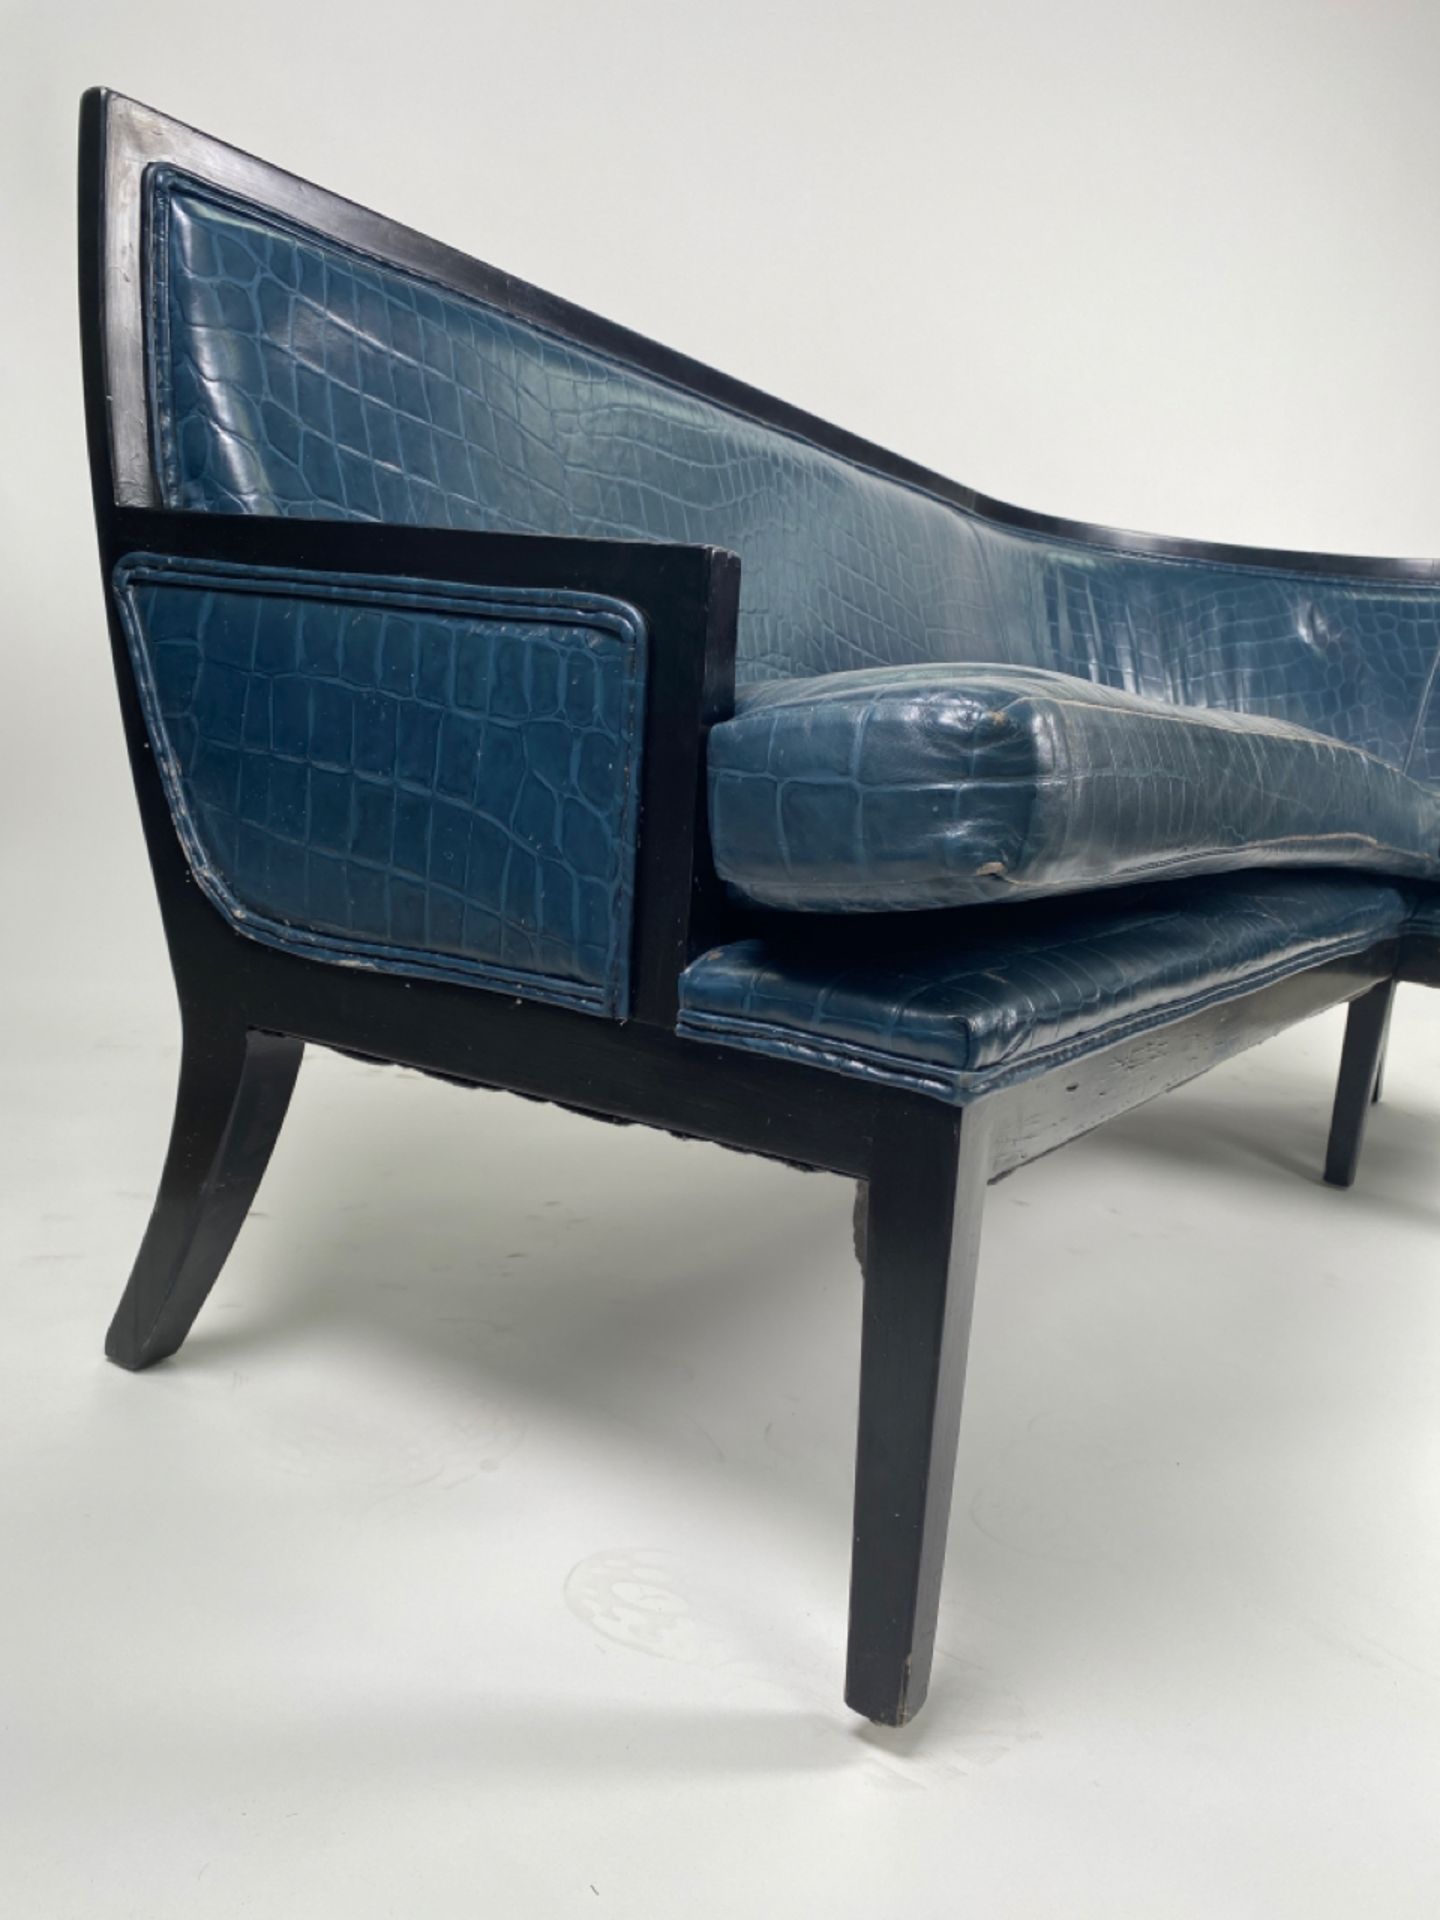 Iconic Berkeley Blue Bar Corner Sofa Commissioned by David Collins - Image 5 of 7